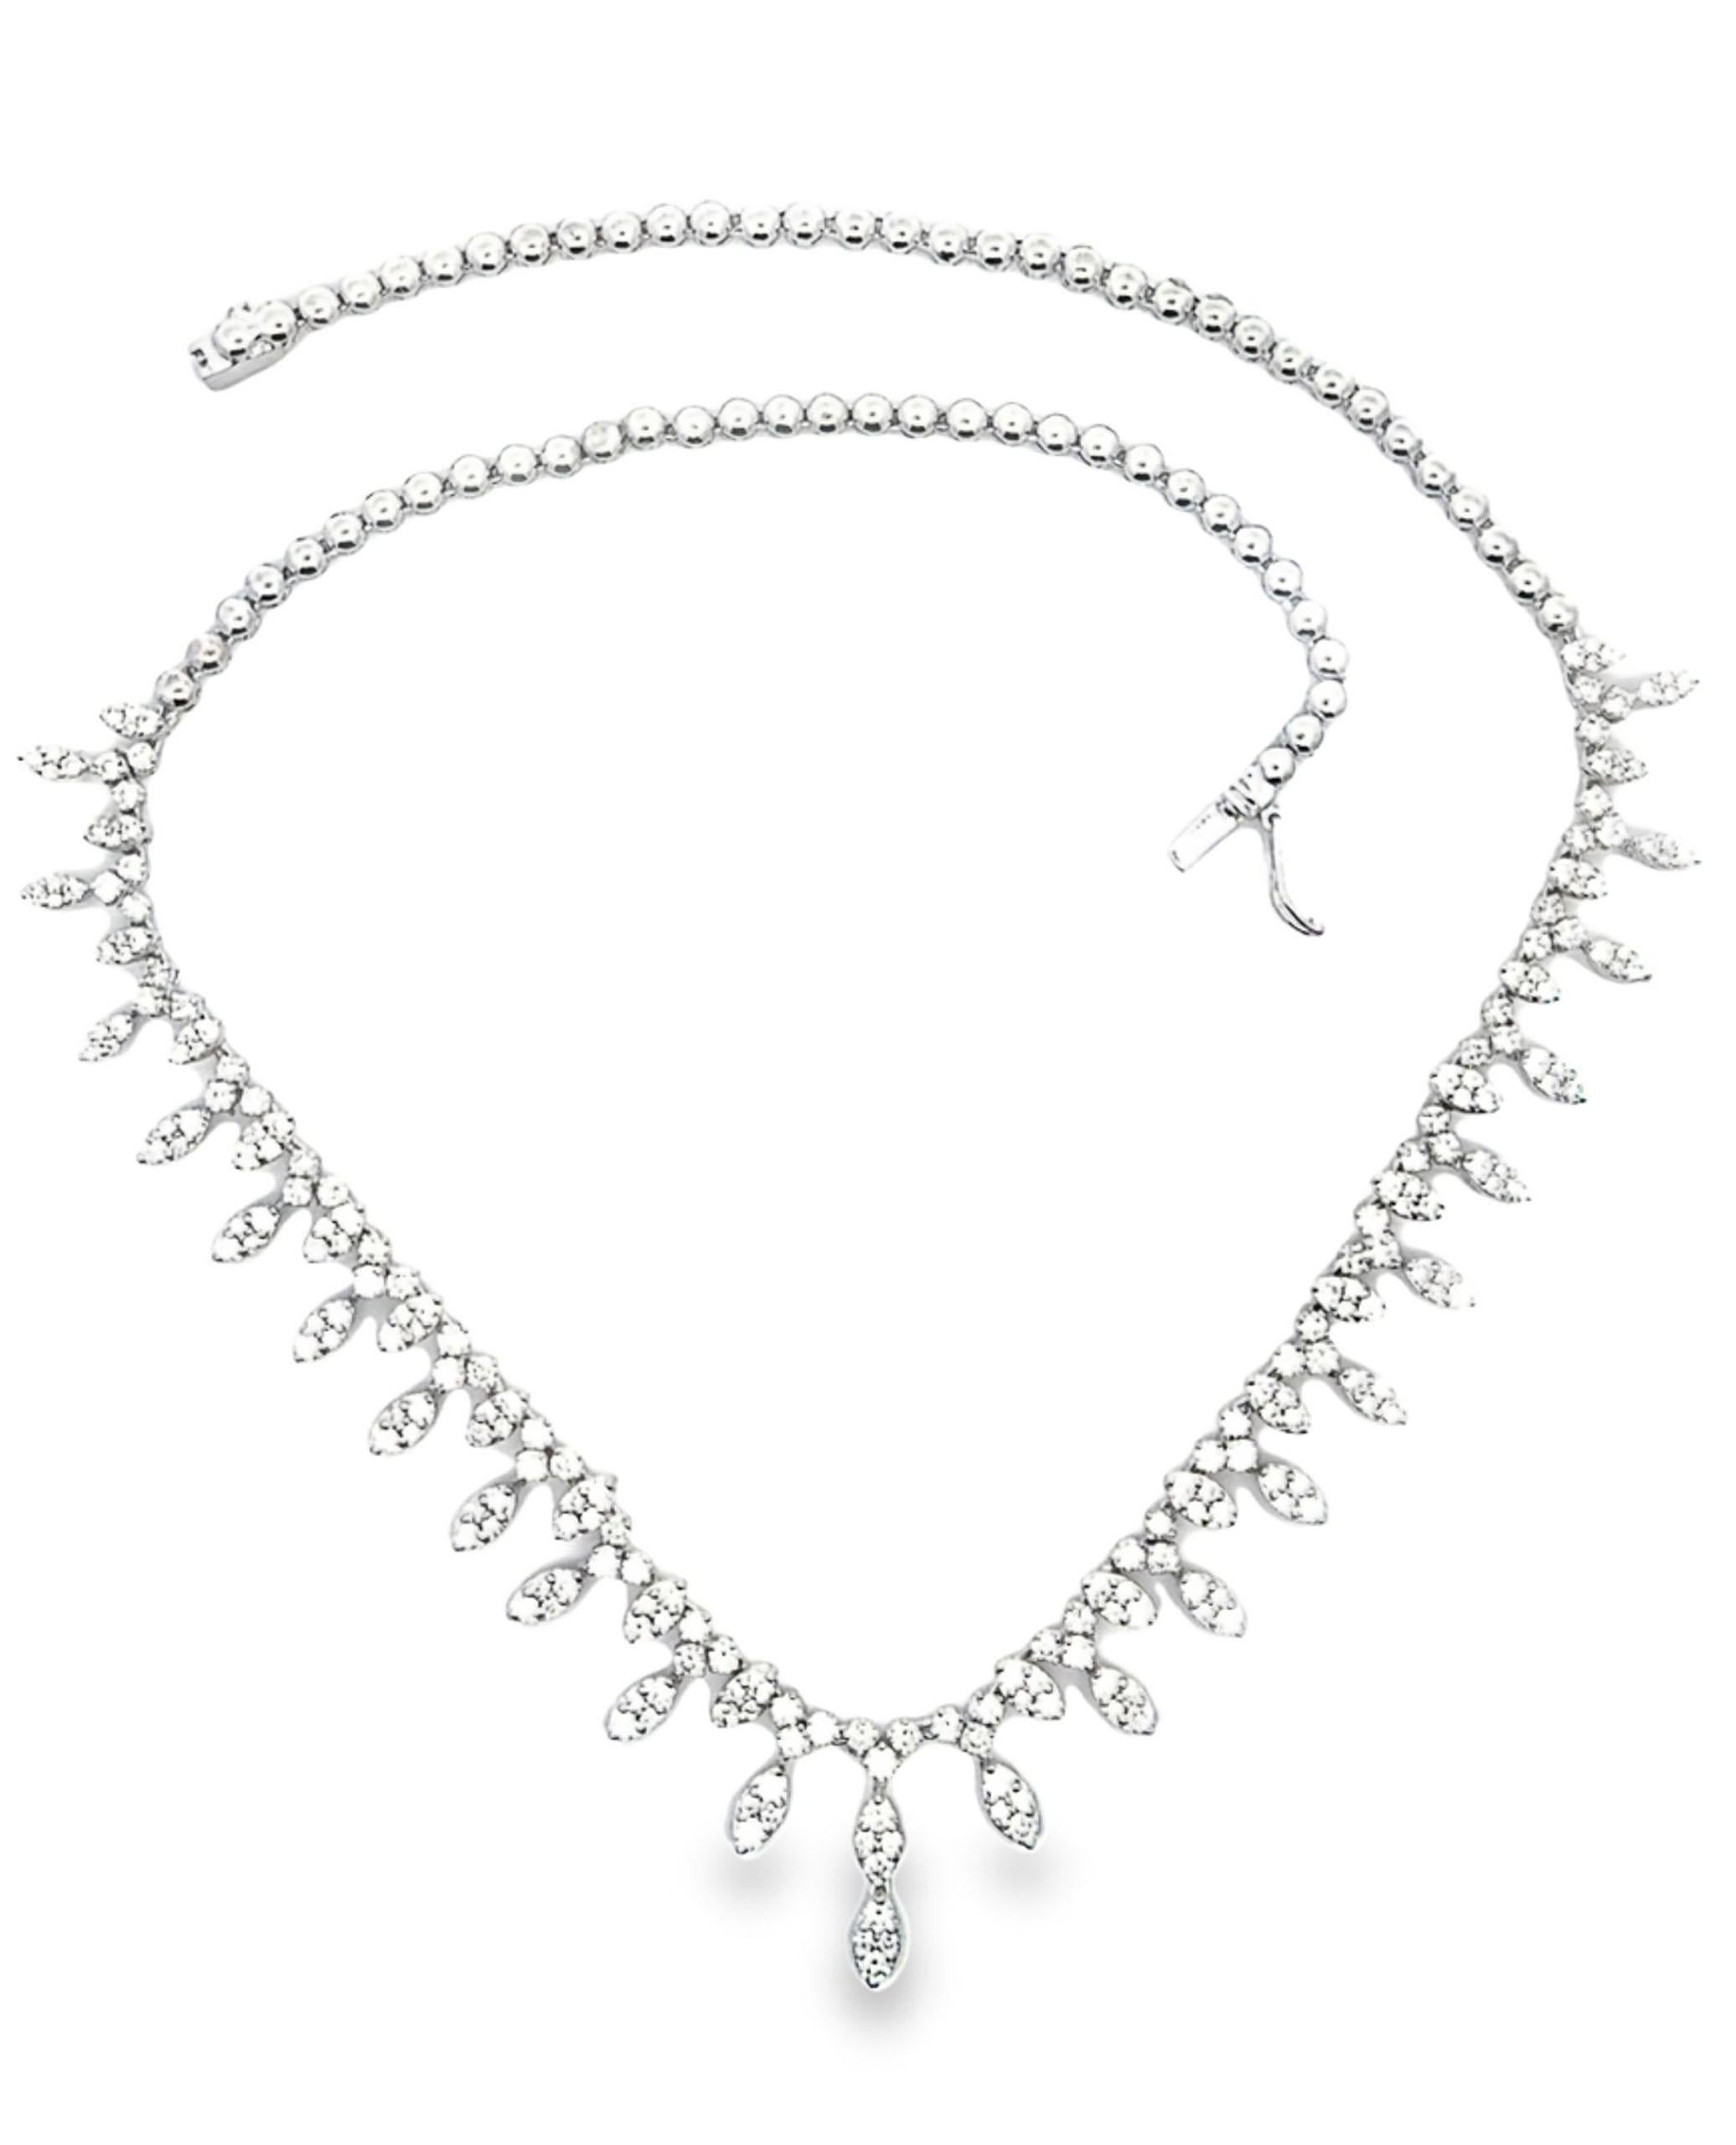 18K white gold diamond statement necklace with 253 round brilliant-cut diamonds weighing 3.65 carats total.

- 16 inches long.
- Diamonds are H color, VS2/SI1 clarity.